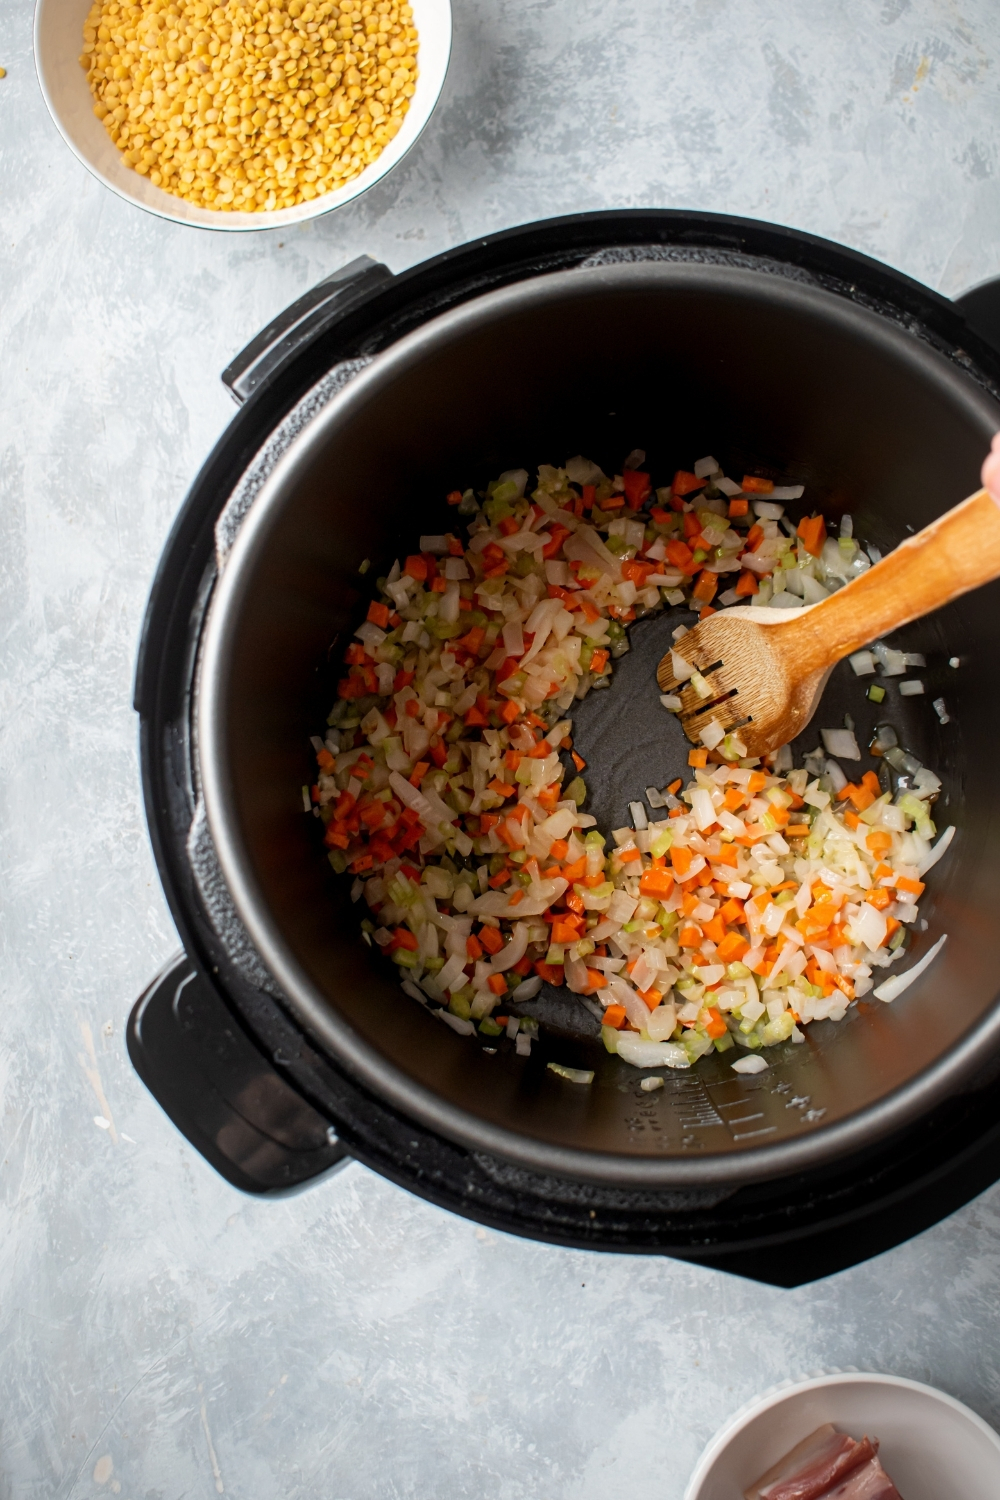 An instant pot filled with chopped carrots onions and celery. The instant pot is on a gray counter and behind it as part of a small white bowl filled with yellow split peas.